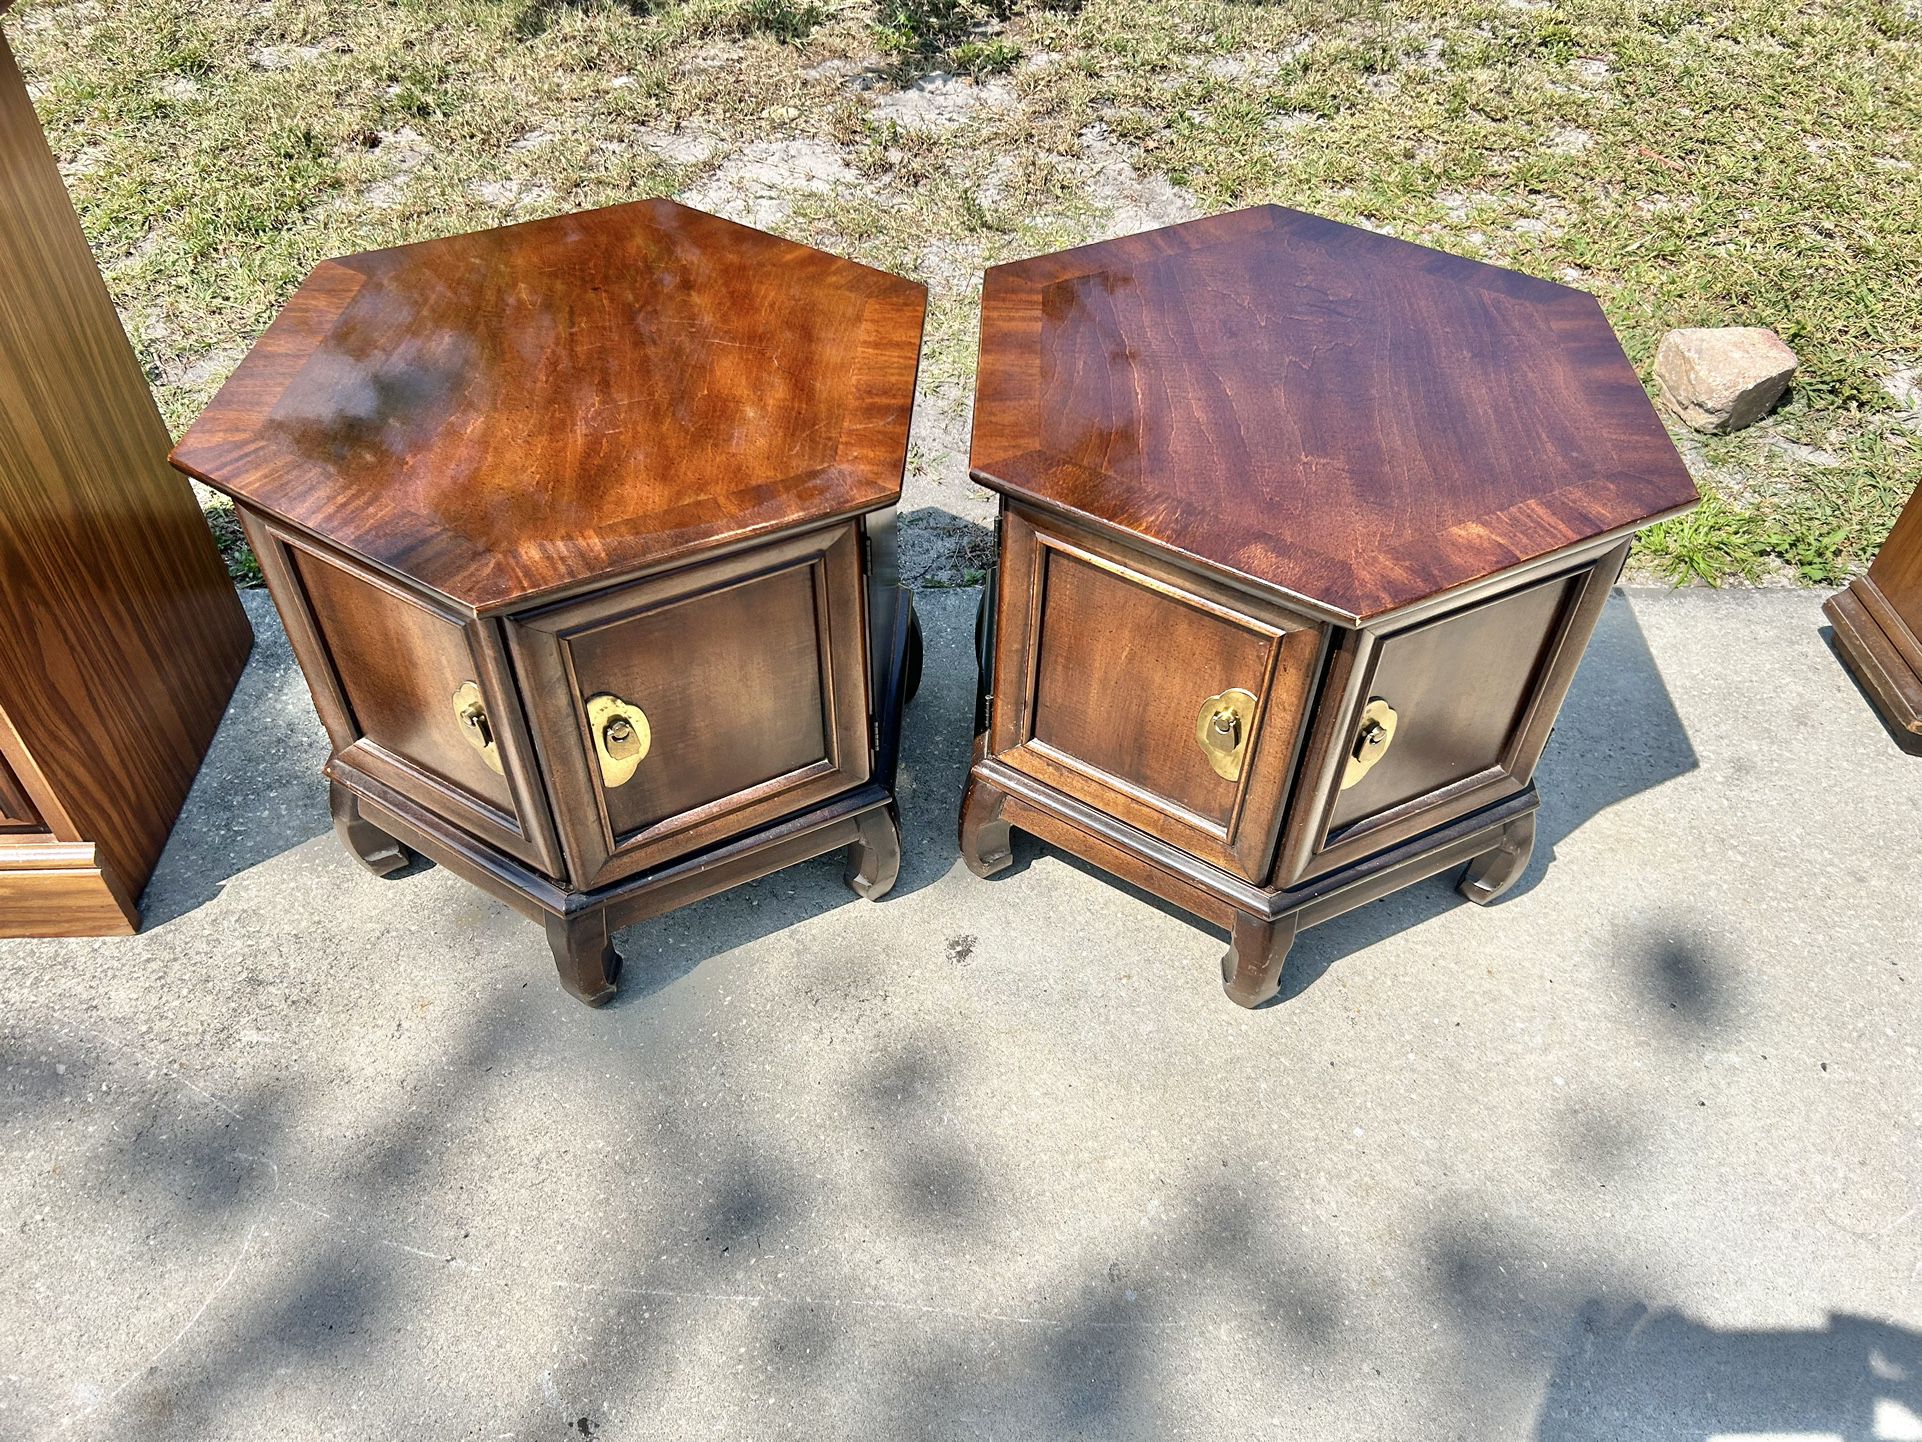 Pair Of End Tables 